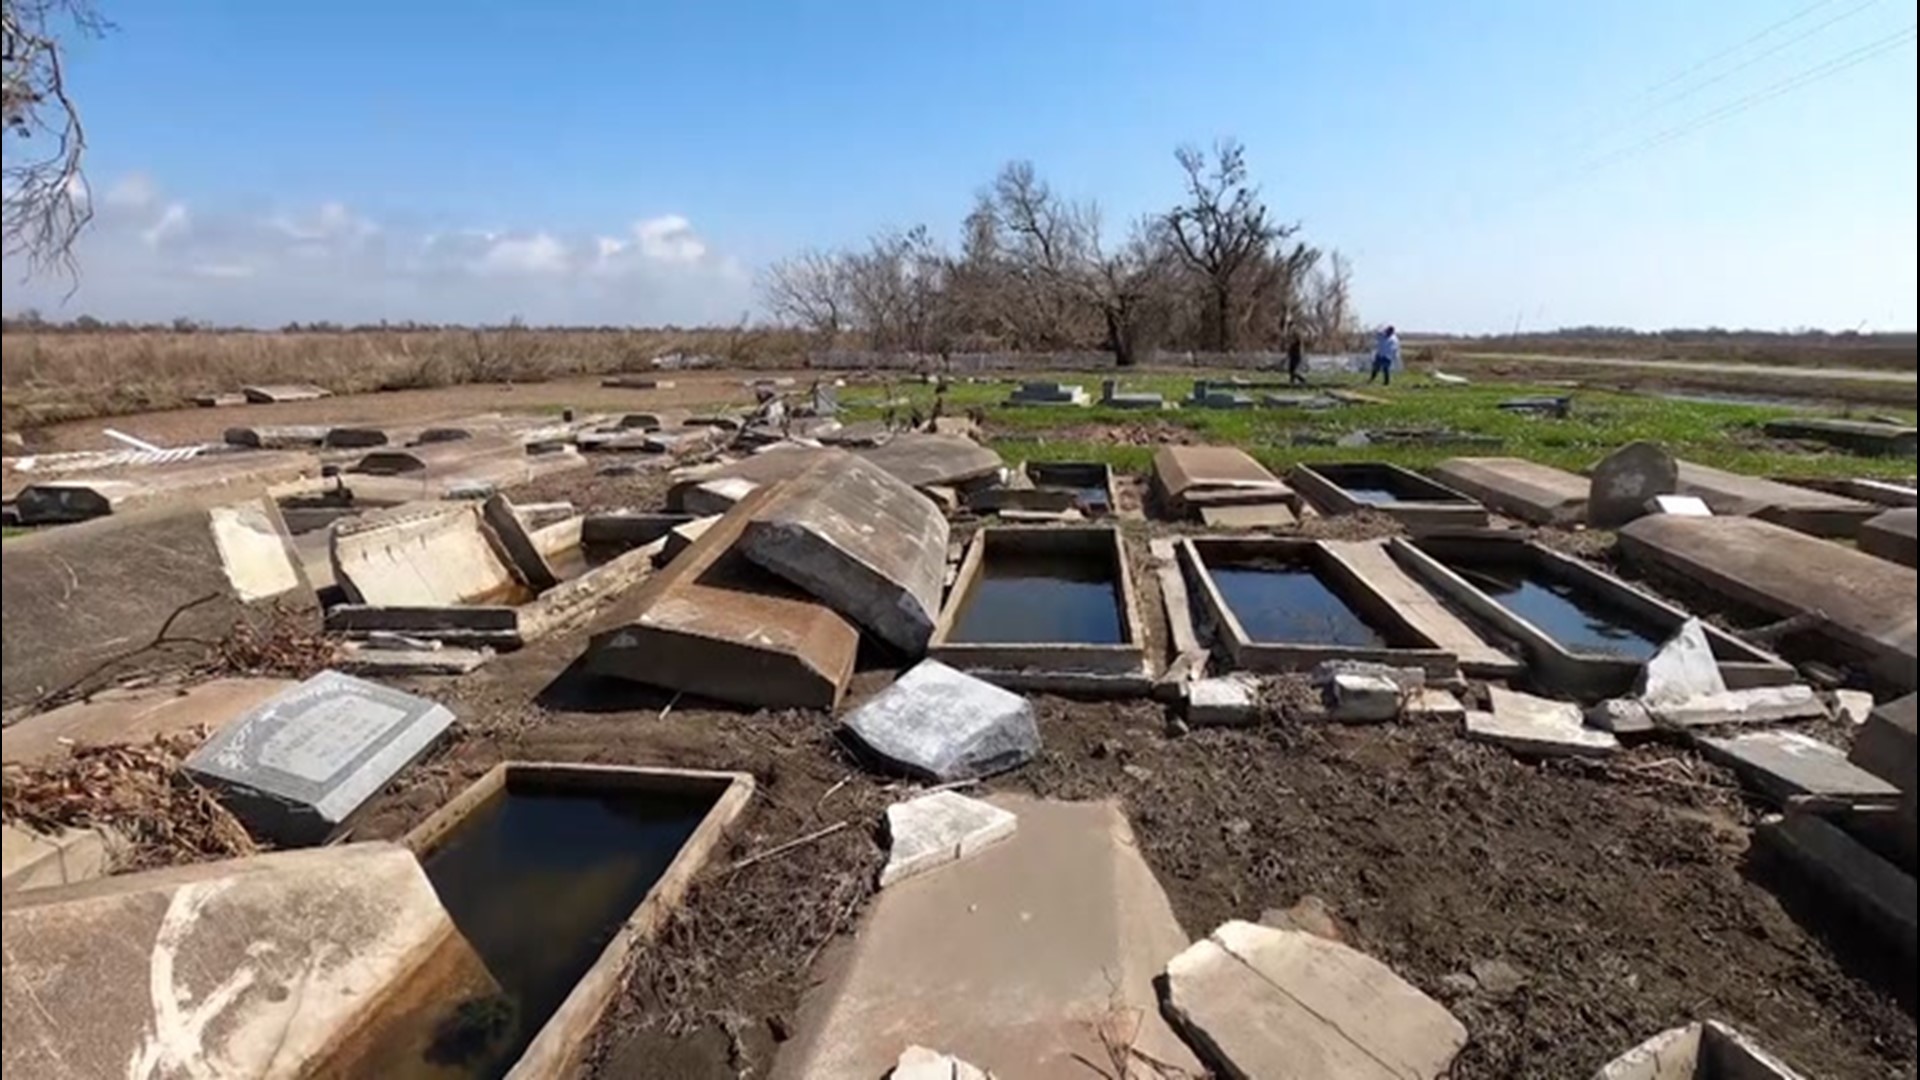 The Louisiana Cemetery Task Force is hoping family members will help report and identify damaged graves and the missing remains of family members after damage was caused by hurricanes Laura and Delta.